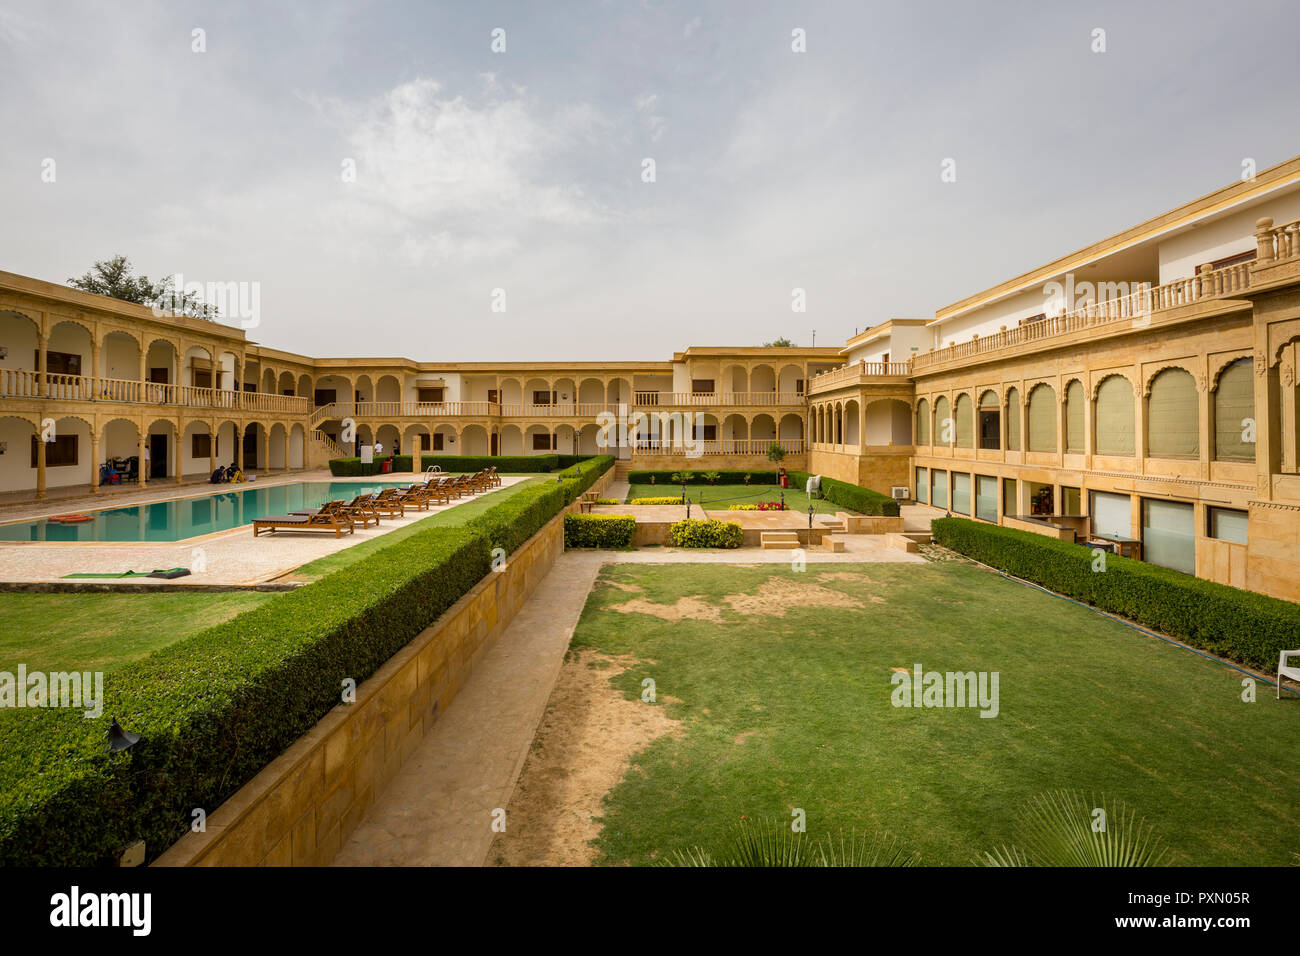 Building and Traditional arches at the Club Mahindra resort in the desert town of Jaisalmer in India Stock Photo